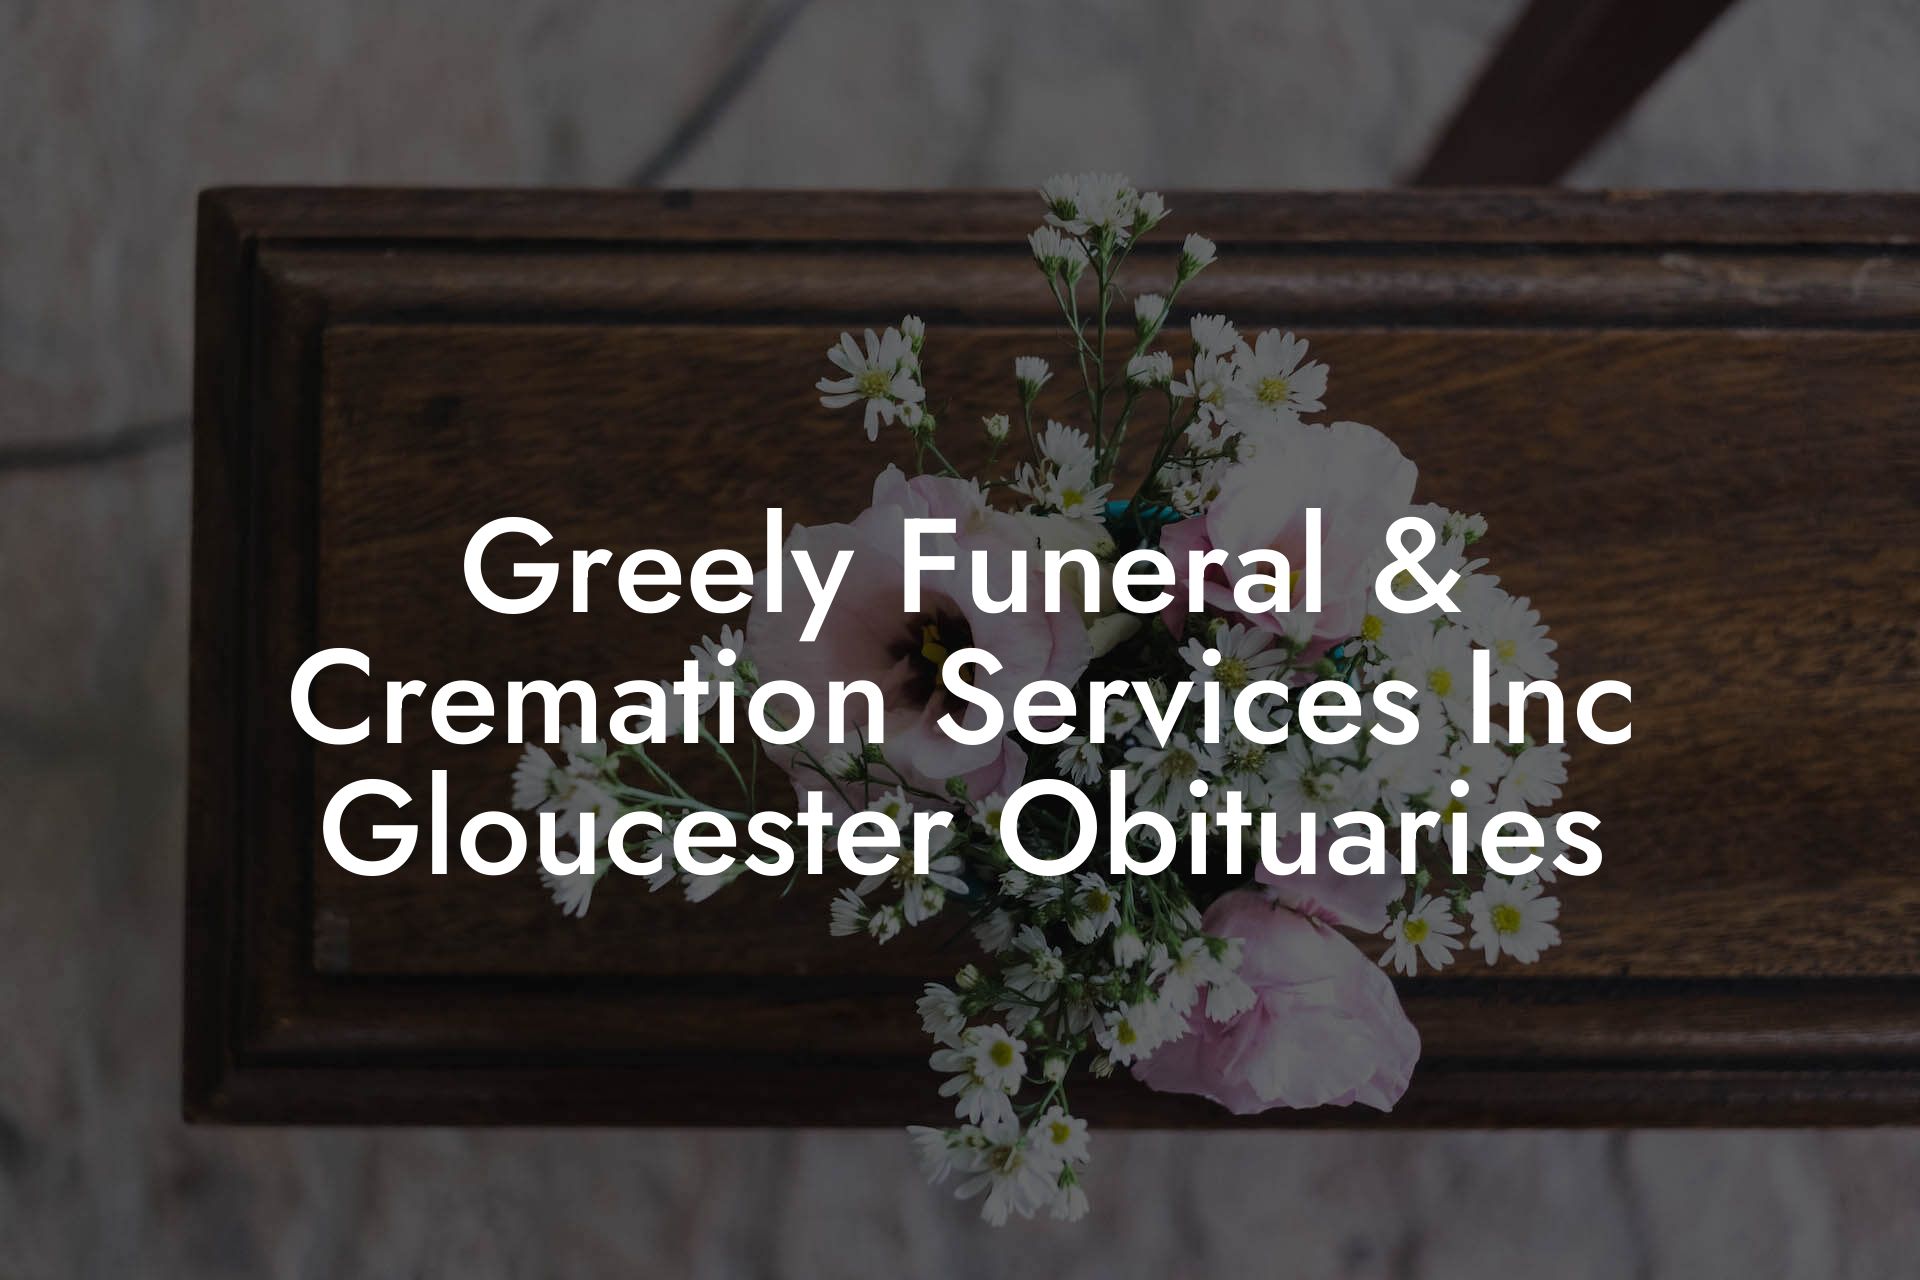 Greely Funeral & Cremation Services Inc Gloucester Obituaries